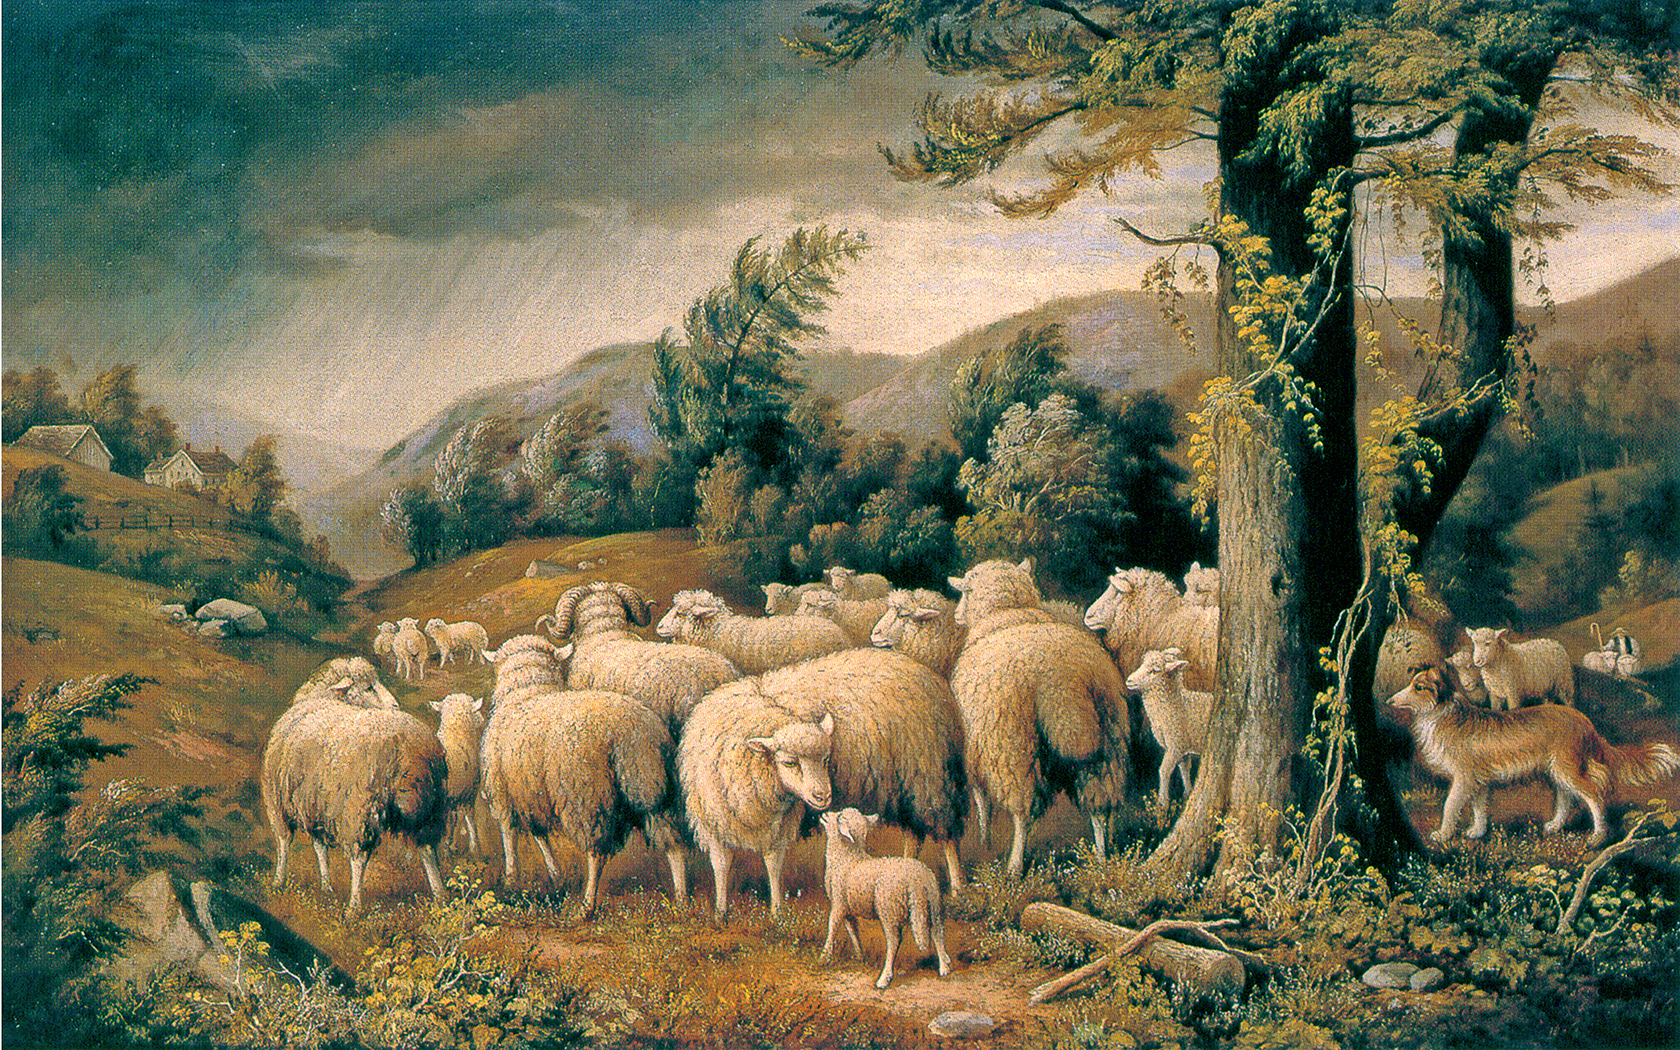 Farm/Pastoral Farm Sheep in a Storm Framed Oil Painting Print on Canvas